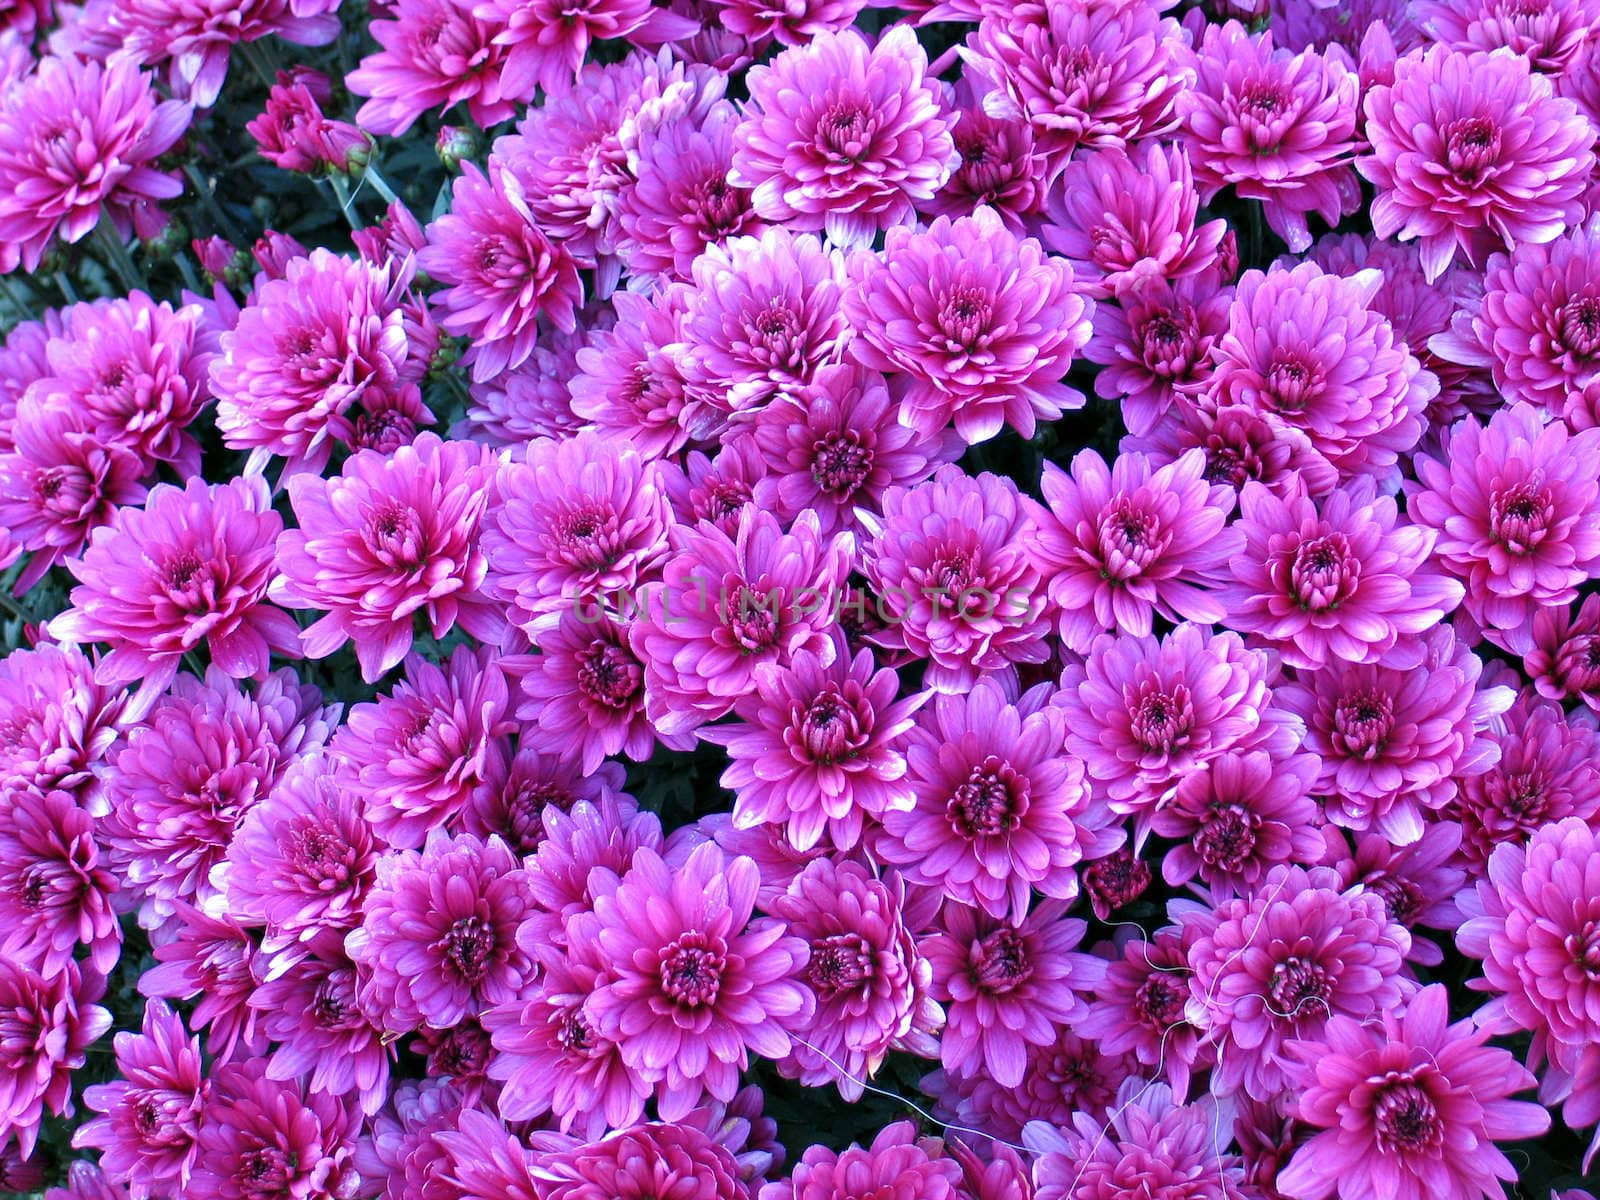 Bed of pink Dahlia flowers by Ronyzmbow